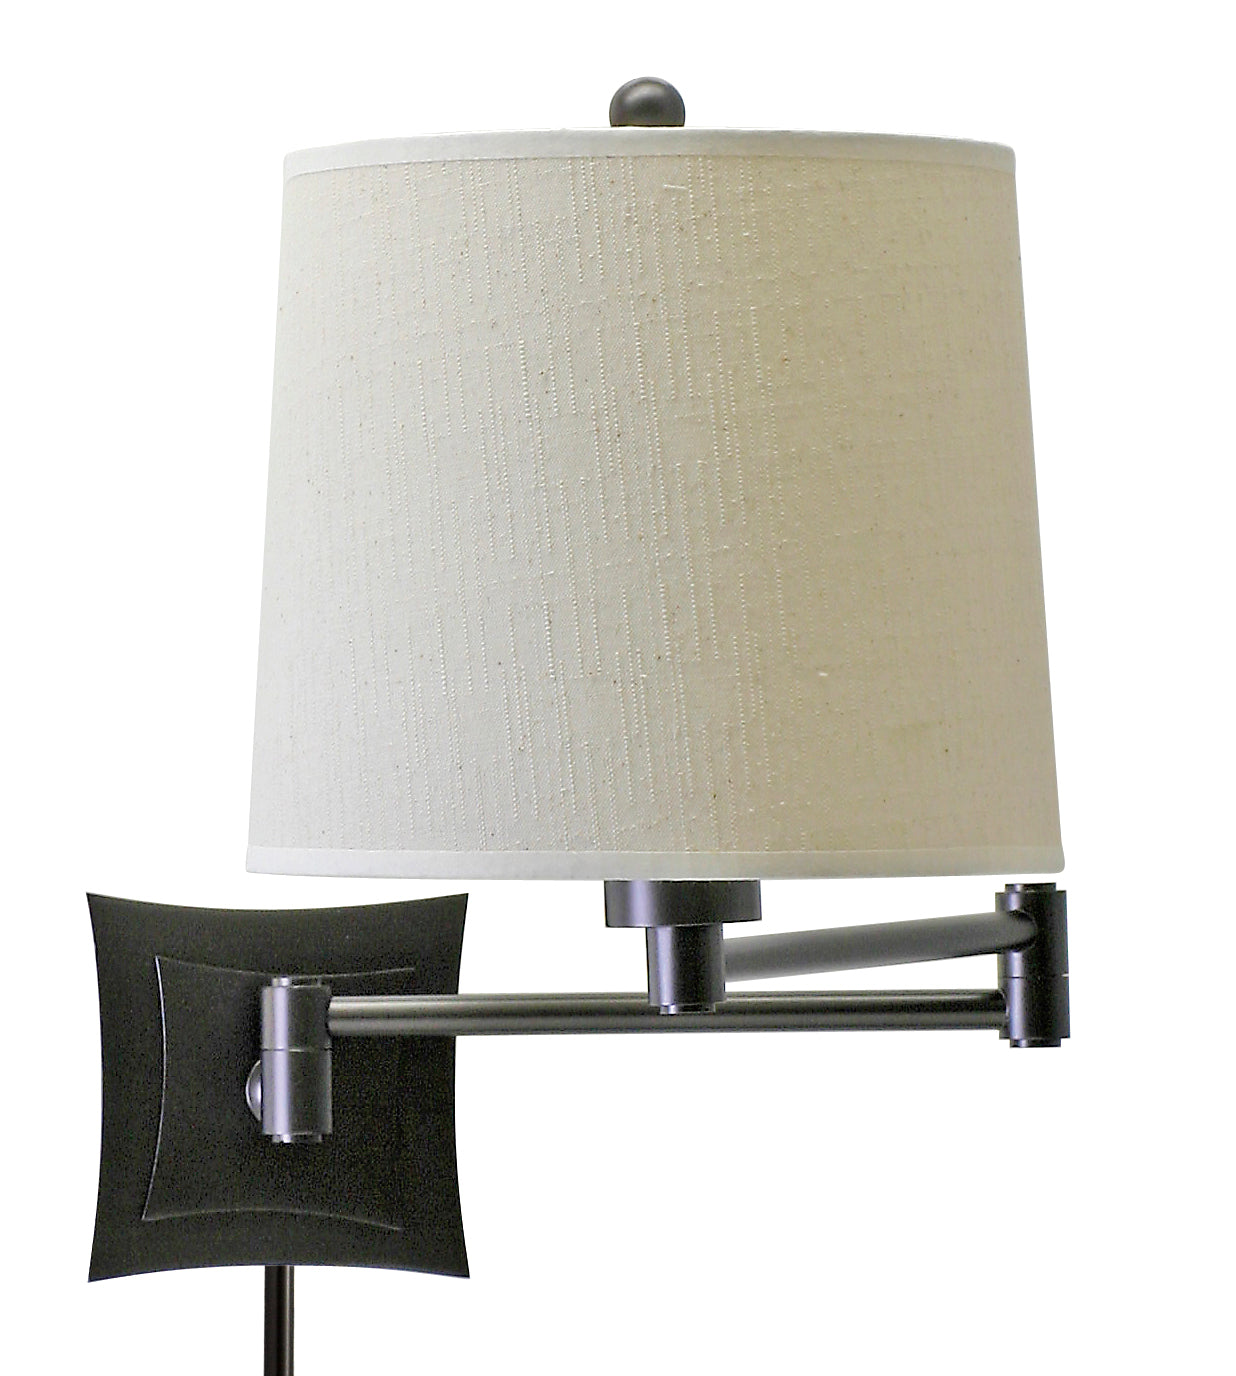 House of Troy Wall Swing Arm Lamp in Oil Rubbed Bronze WS752-OB